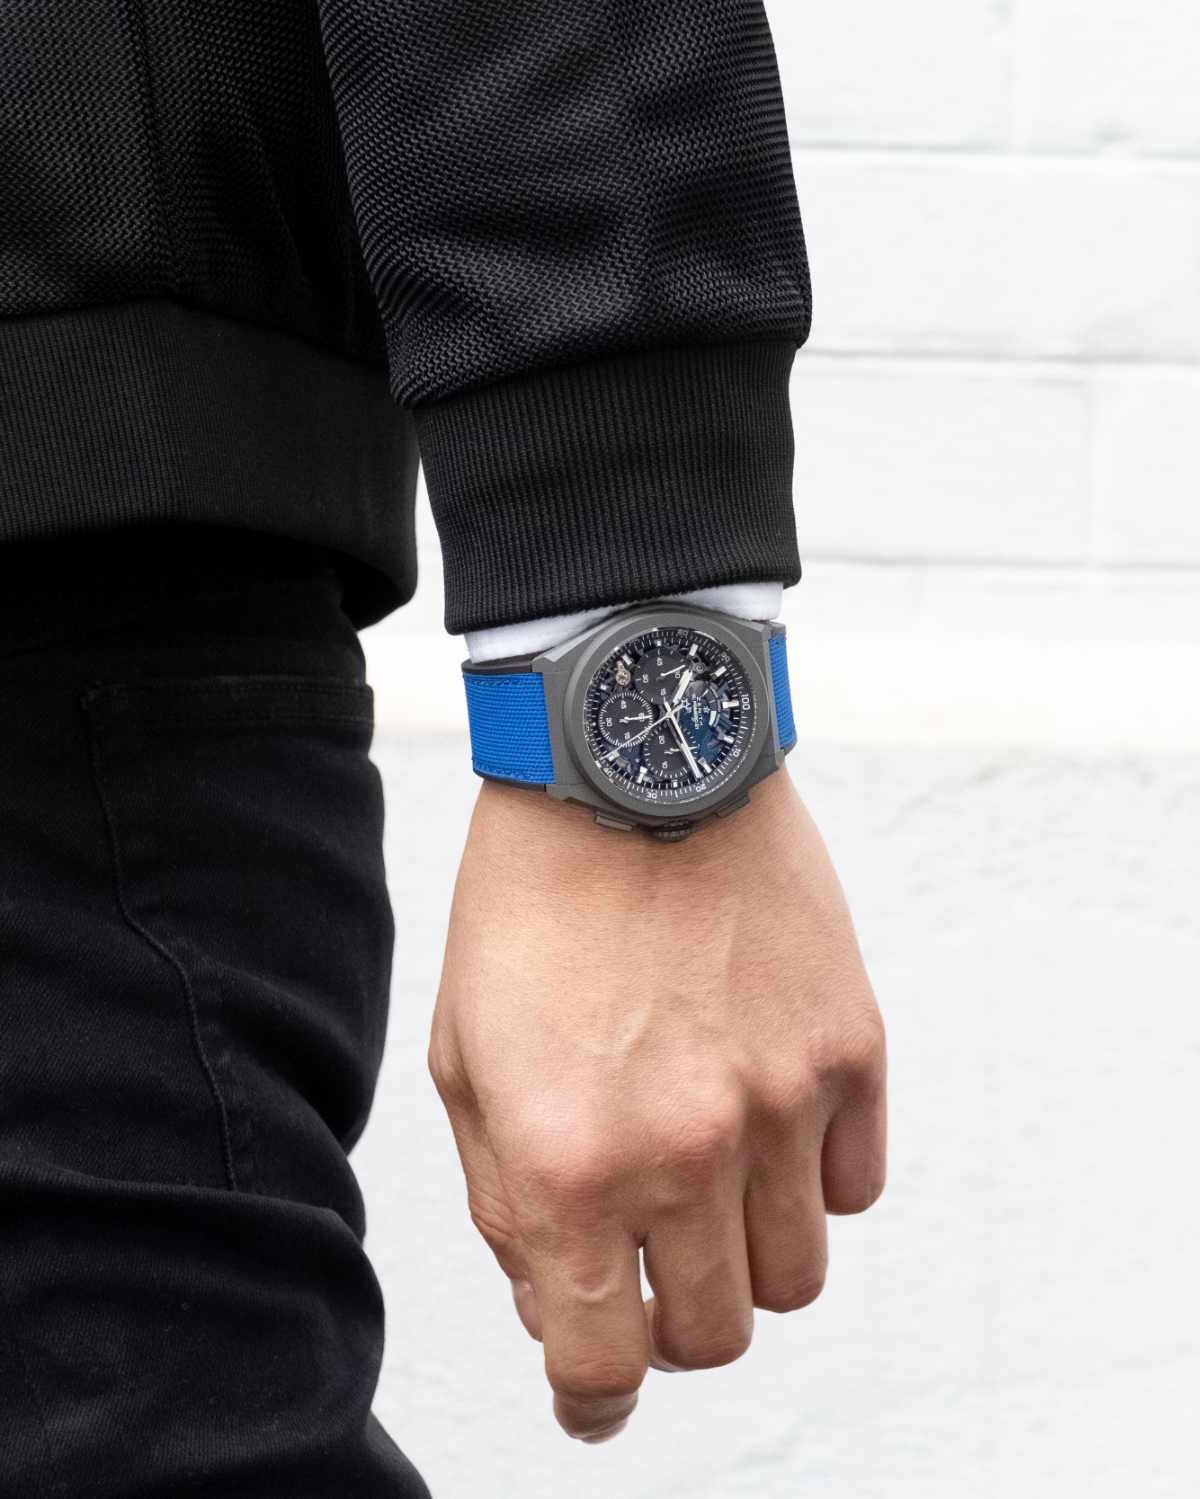 Zenith Explores Frequencies Of Light And Movement With The DEFY 21 Ultrablue